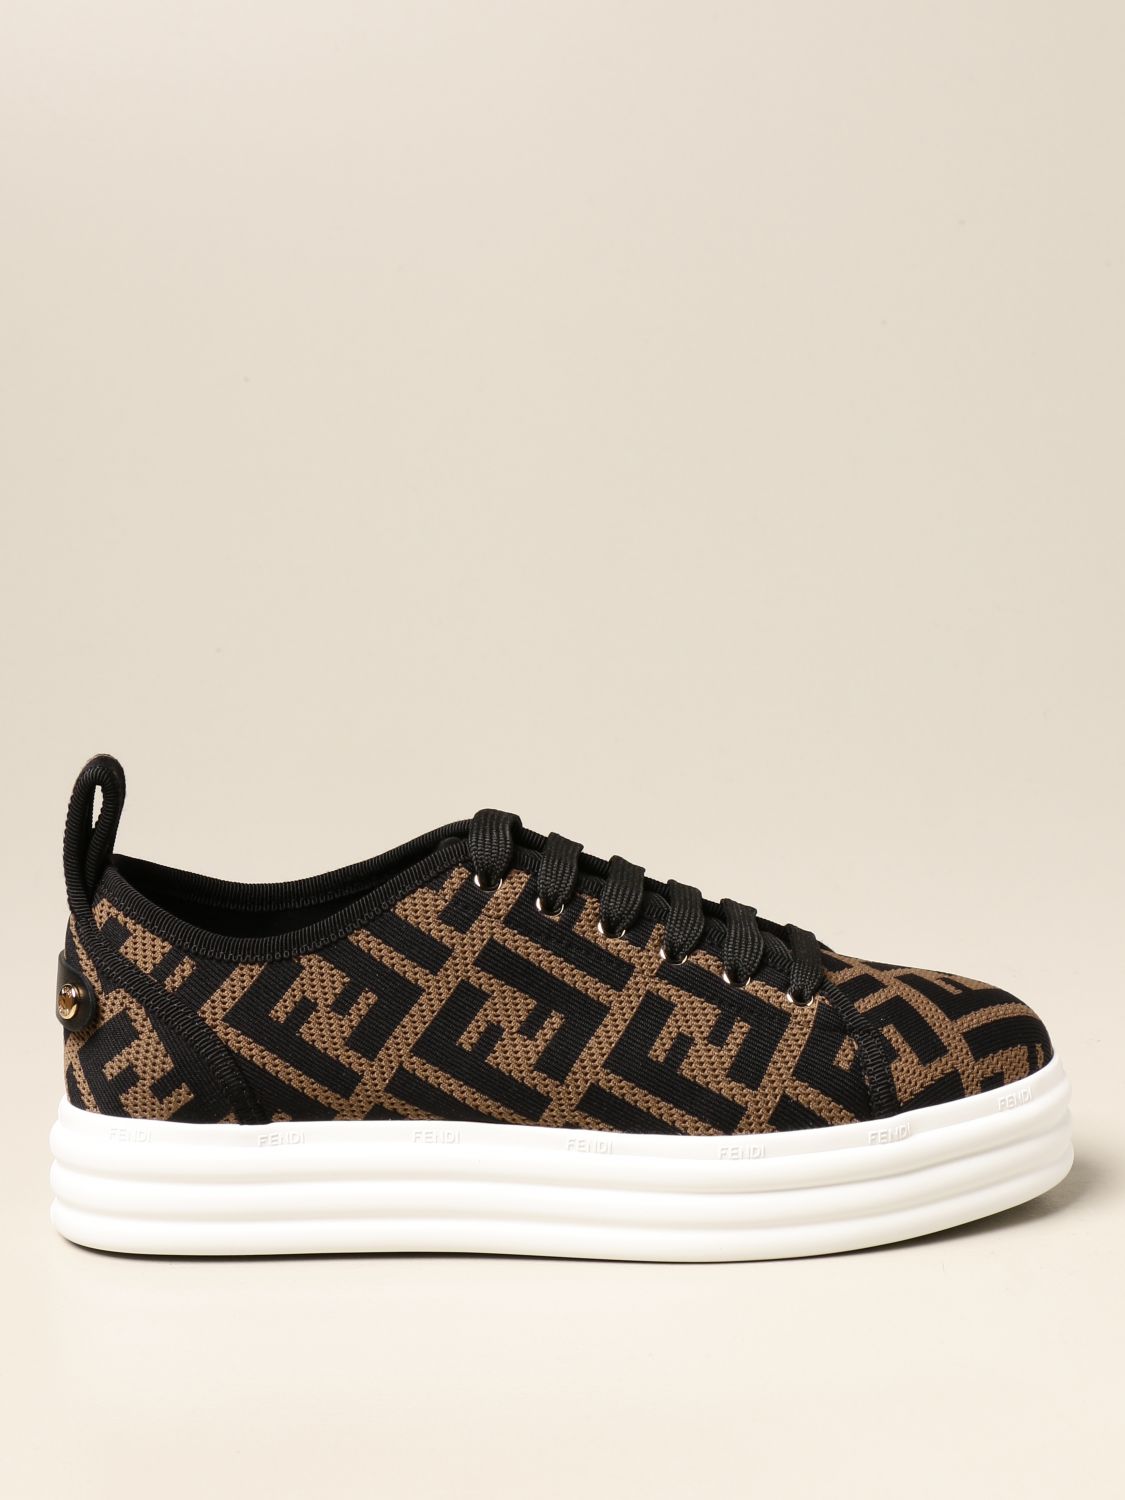 FENDI: sneakers in micro-perforated FF fabric - Tobacco | Fendi shoes ...